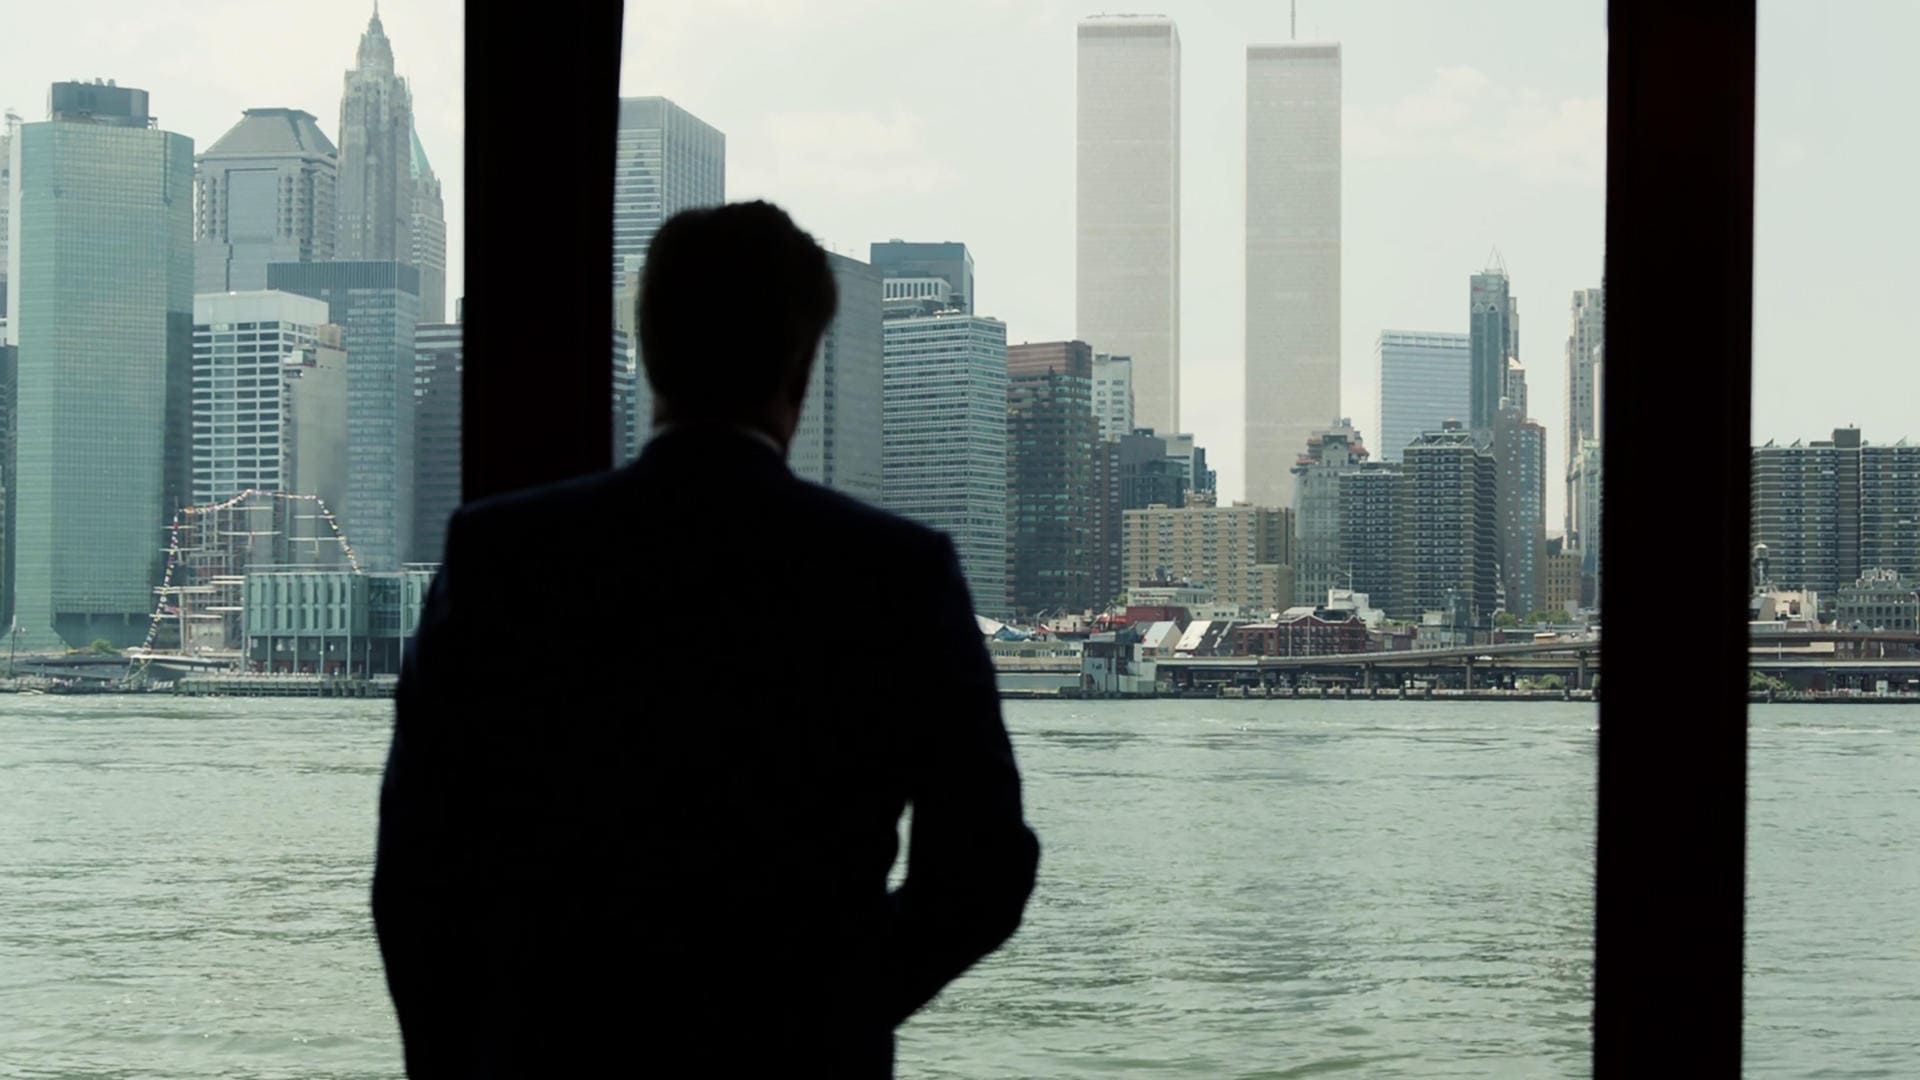 The Looming Tower background